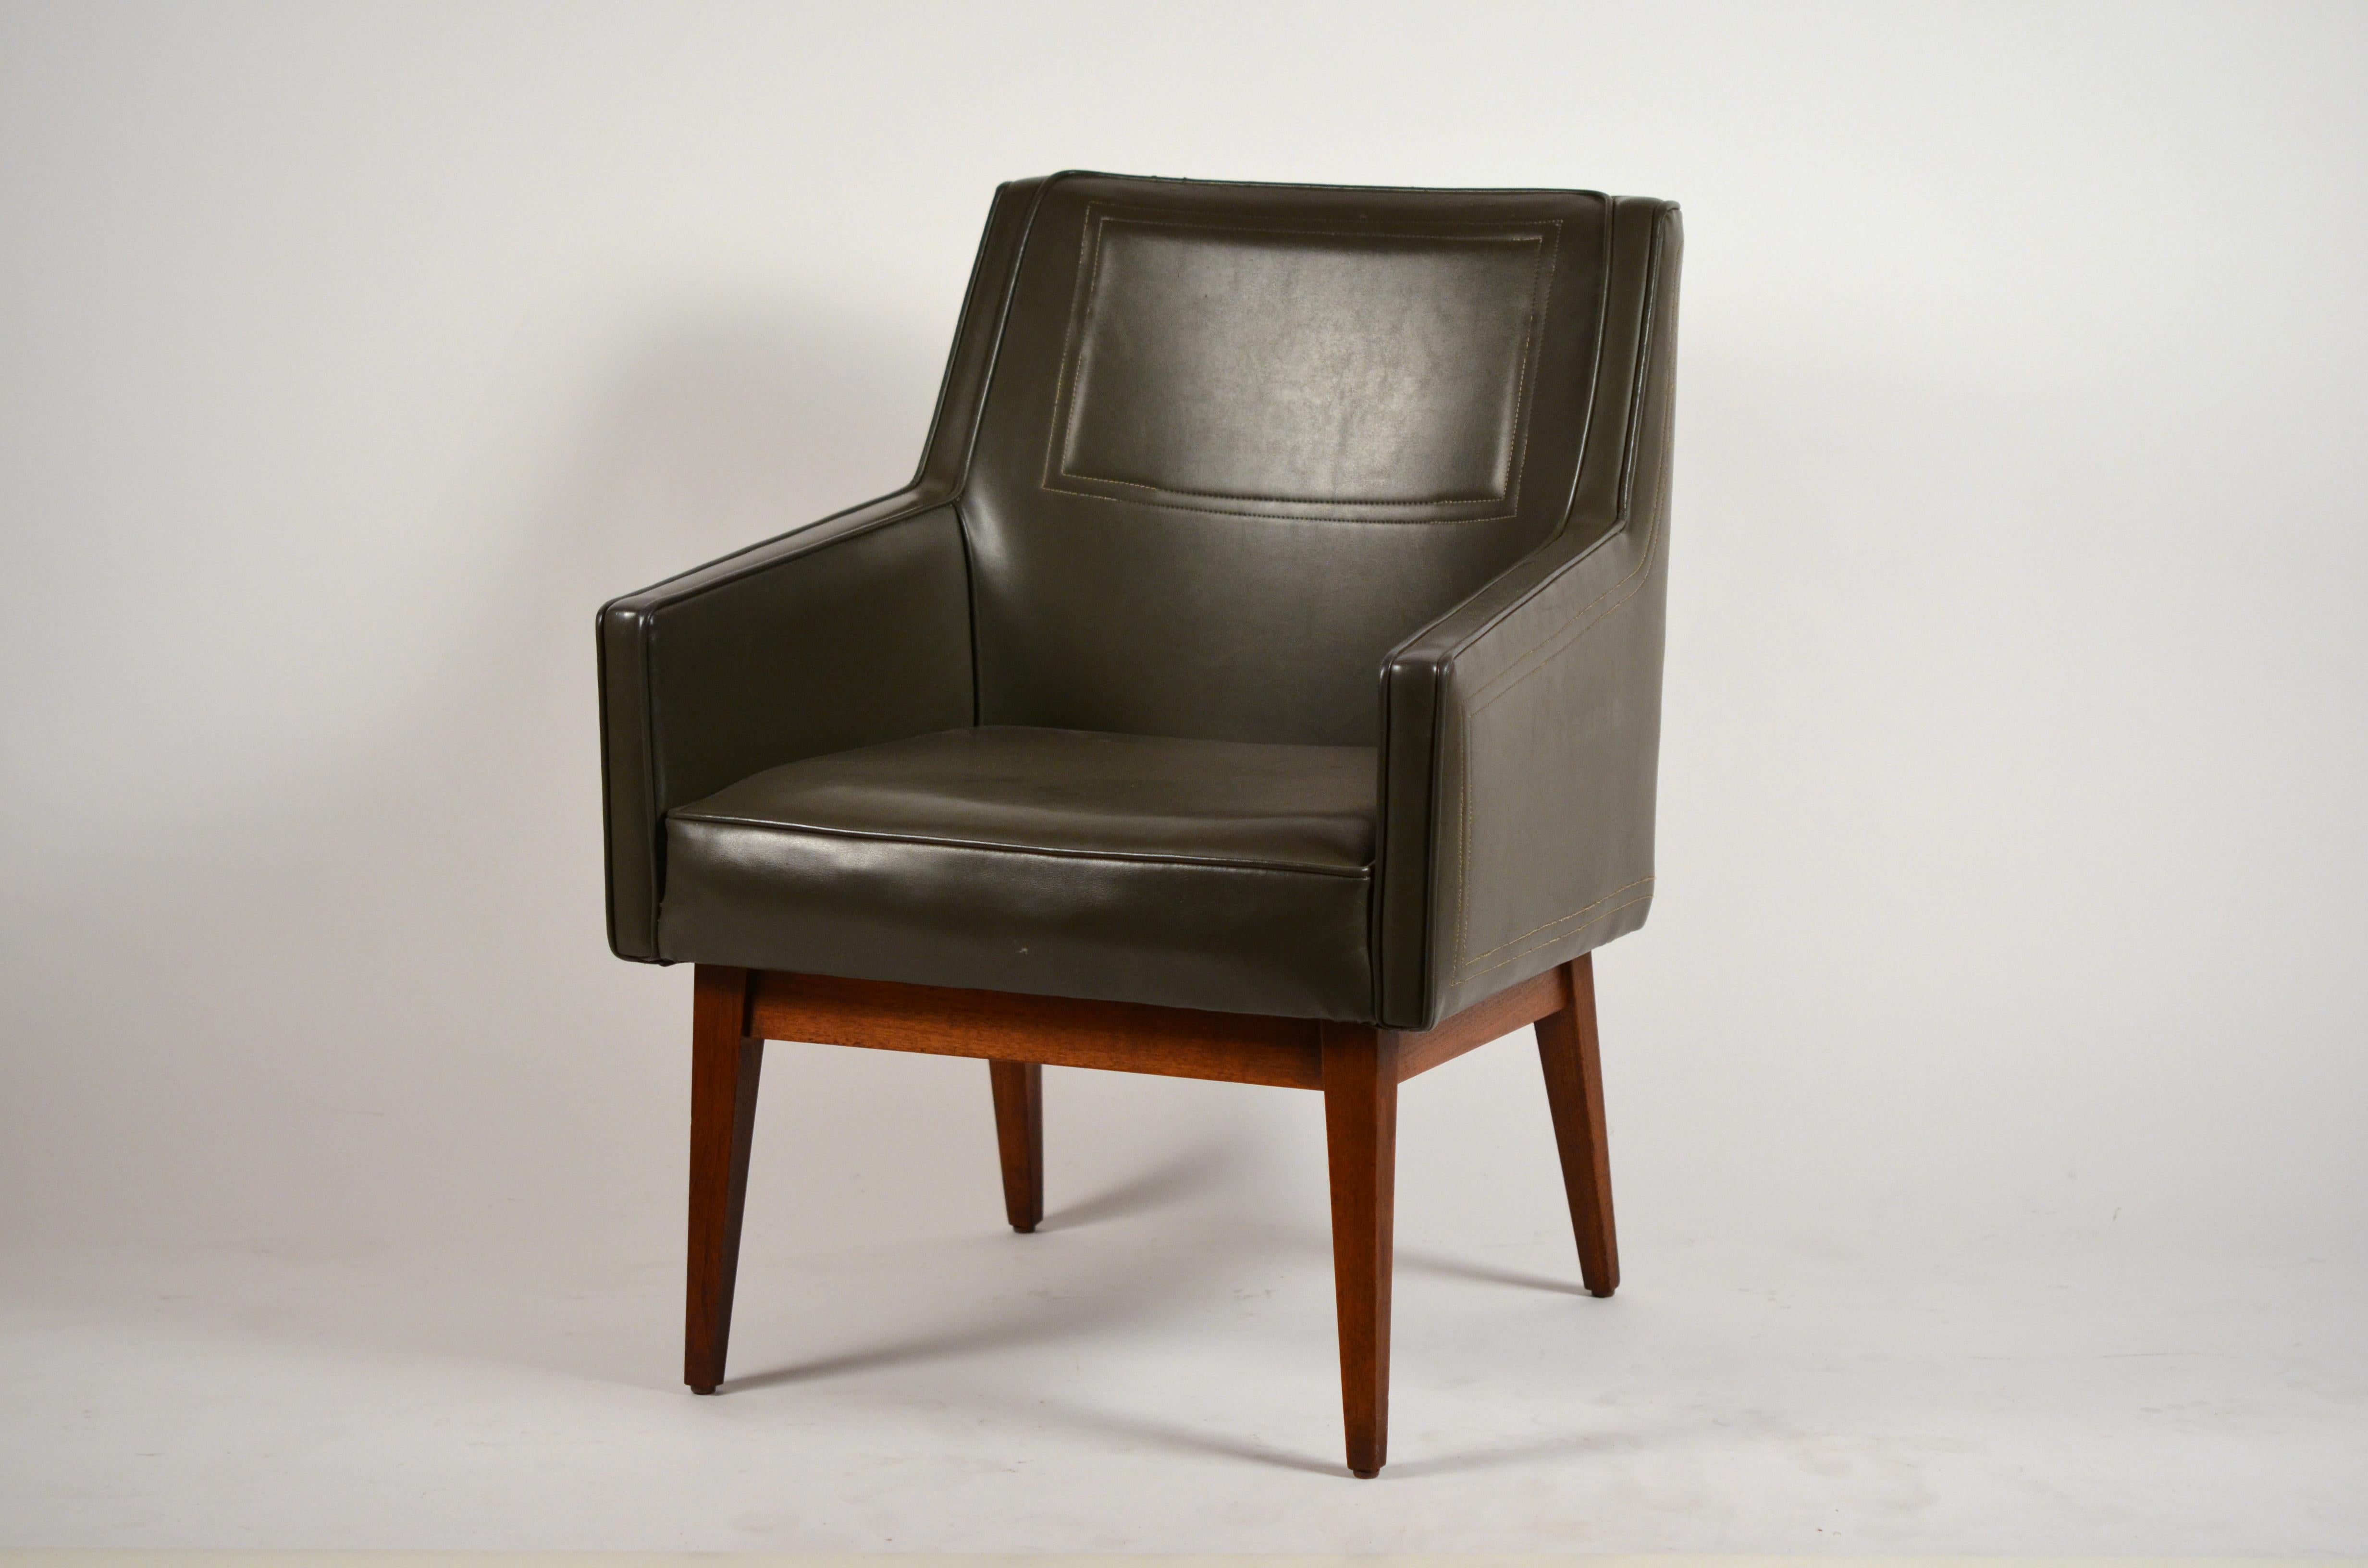 American Pair of Early Modernist Armchairs by Vista of California for Stow Davis